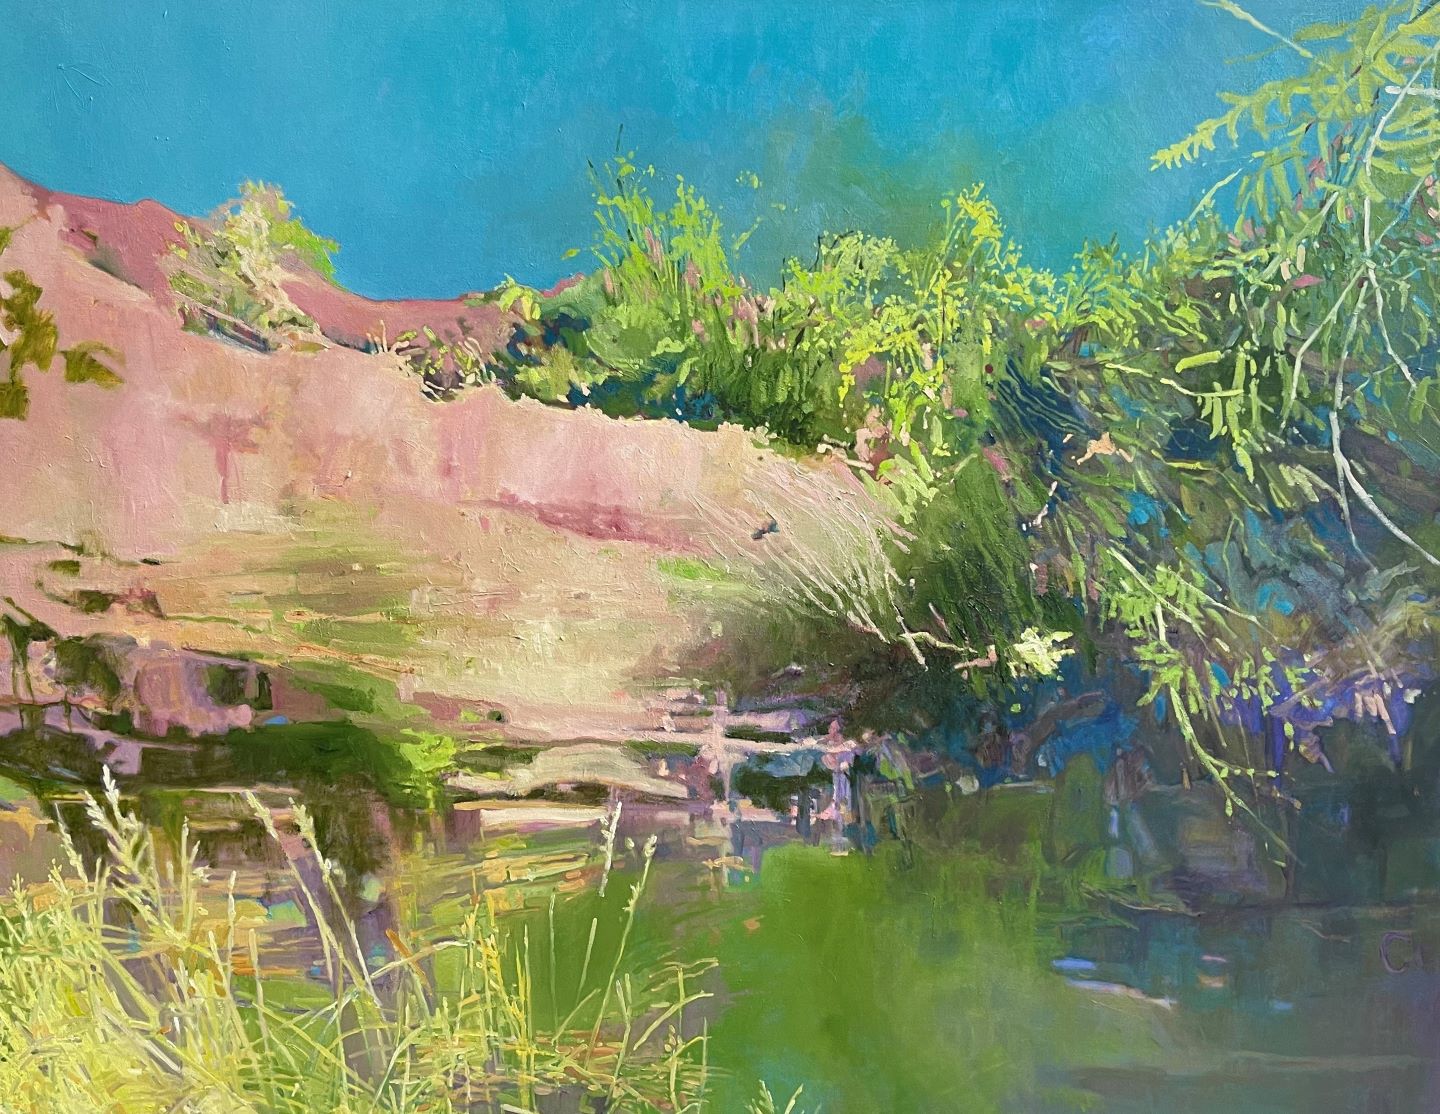 A painting of a still river suroounded by lush green foliage and pink hills leading down to the bank